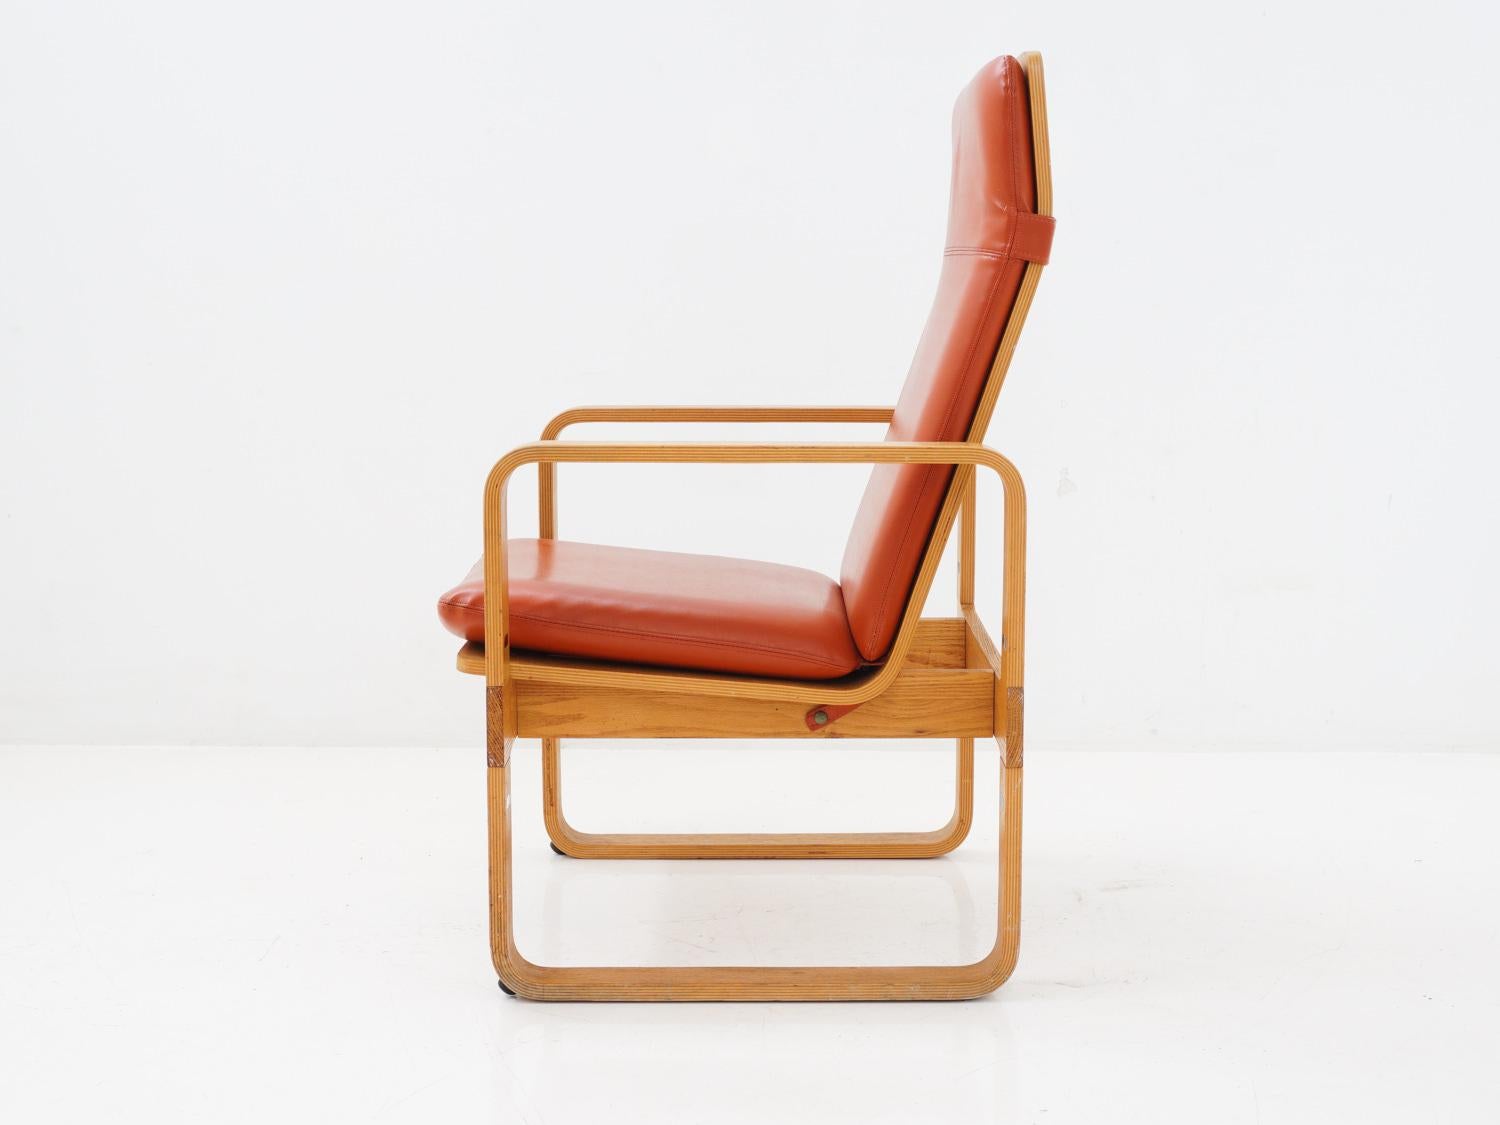 The Bentwood Armchair by Thonet, a classic design from 1983, combines elegance and comfort with its curved wooden frame and timeless appeal. A perfect blend of craftsmanship and style, it's a chair that stands the test of time and invites you to sit